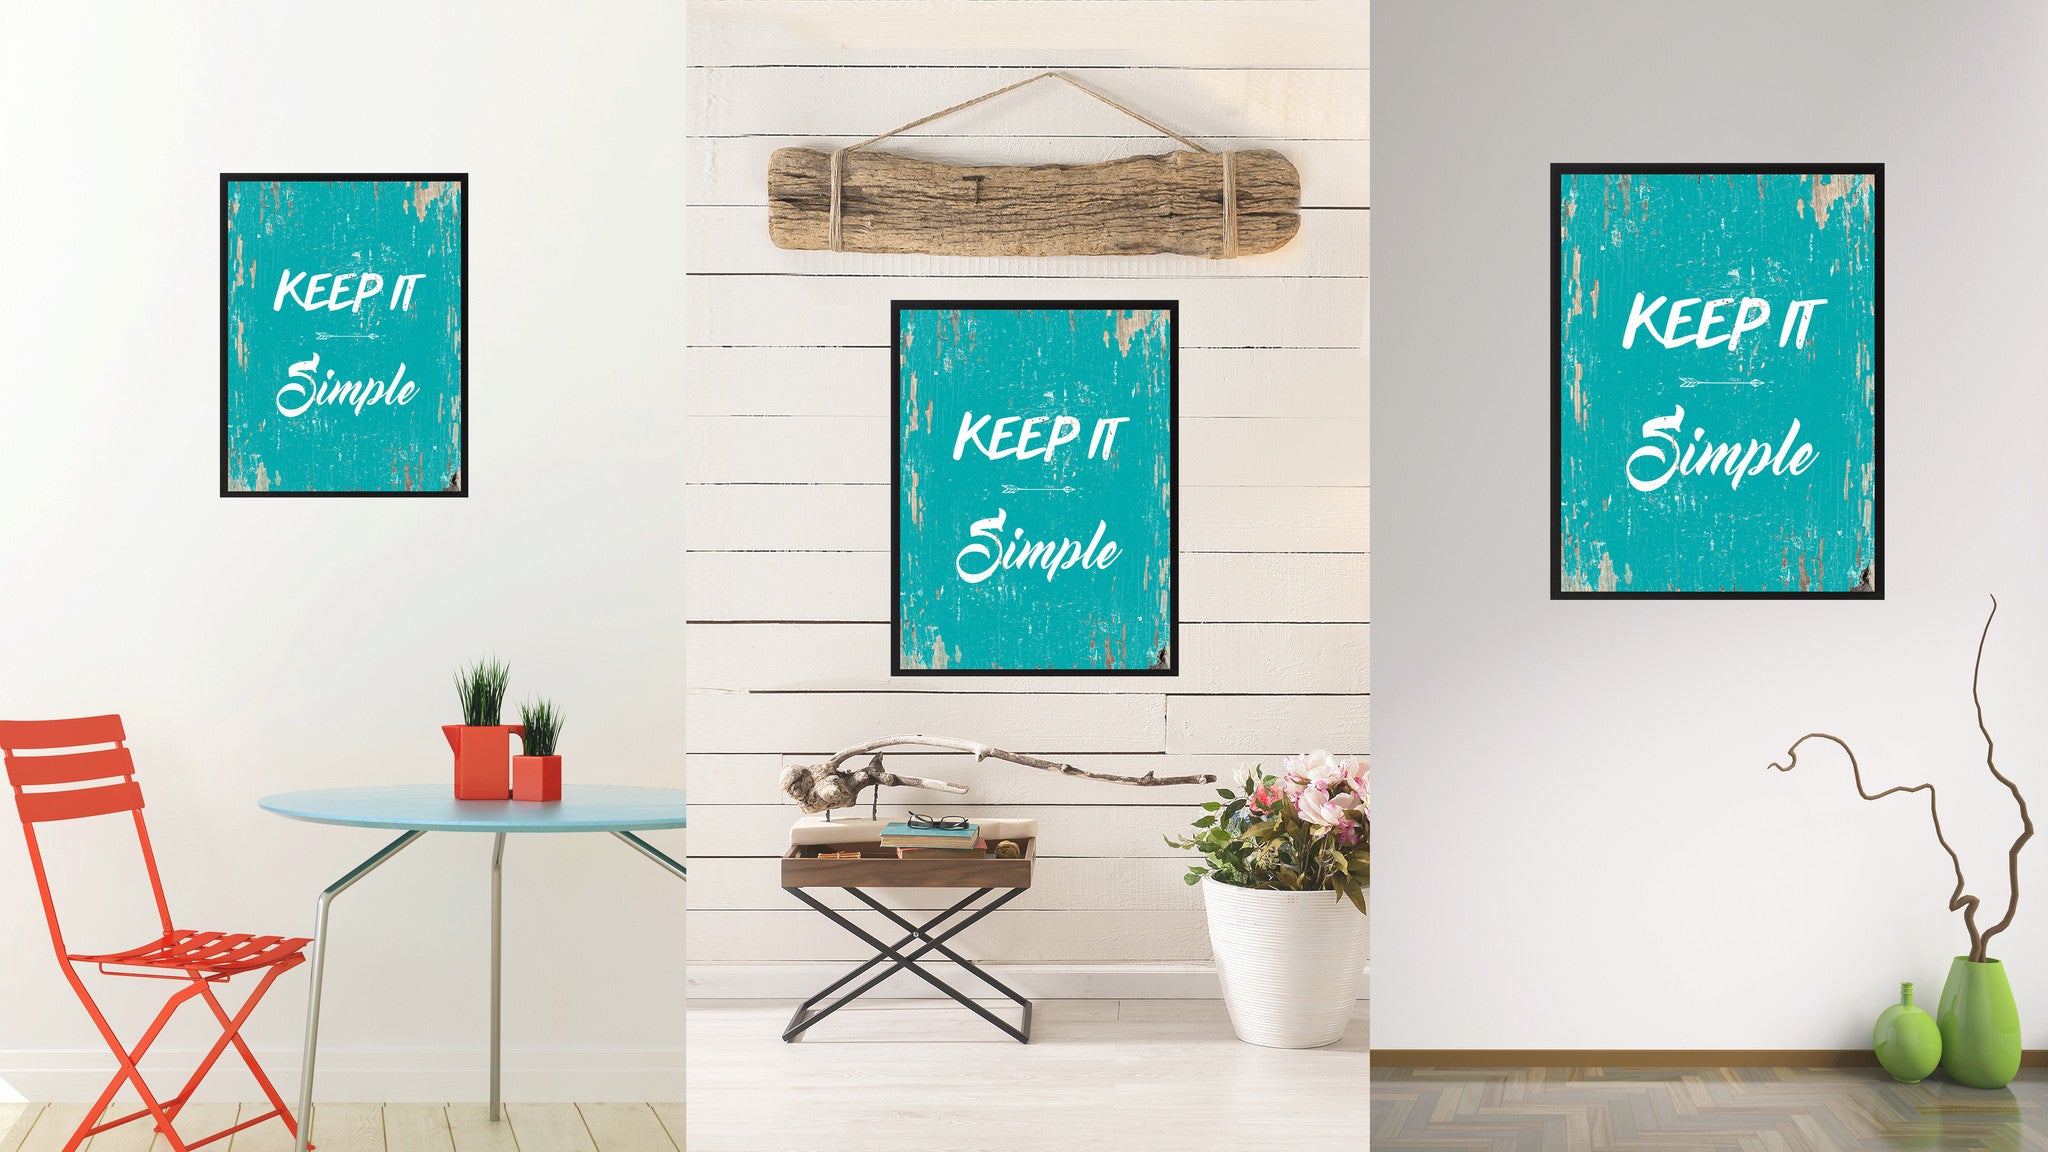 Keep it simple Wisdom Quote Saying Gift Ideas Home Decor Wall Art